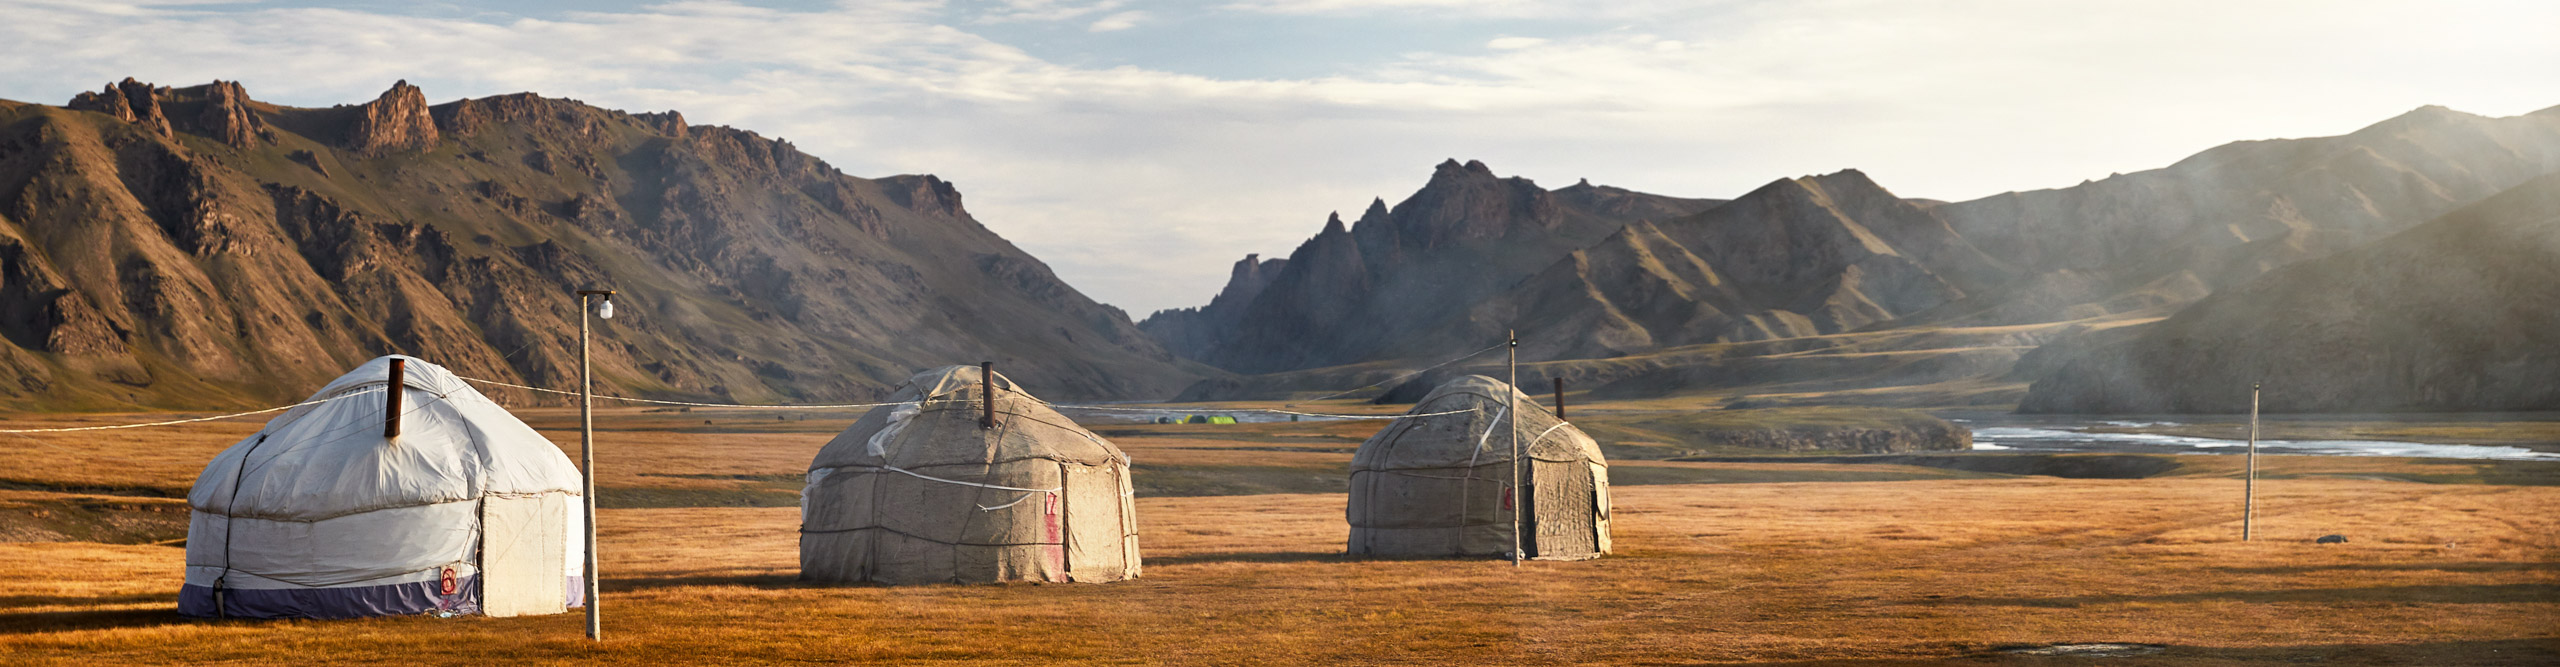 Round Yurt nomadic houses camp at mountain valley in Kyrgyzstan, at dusk 